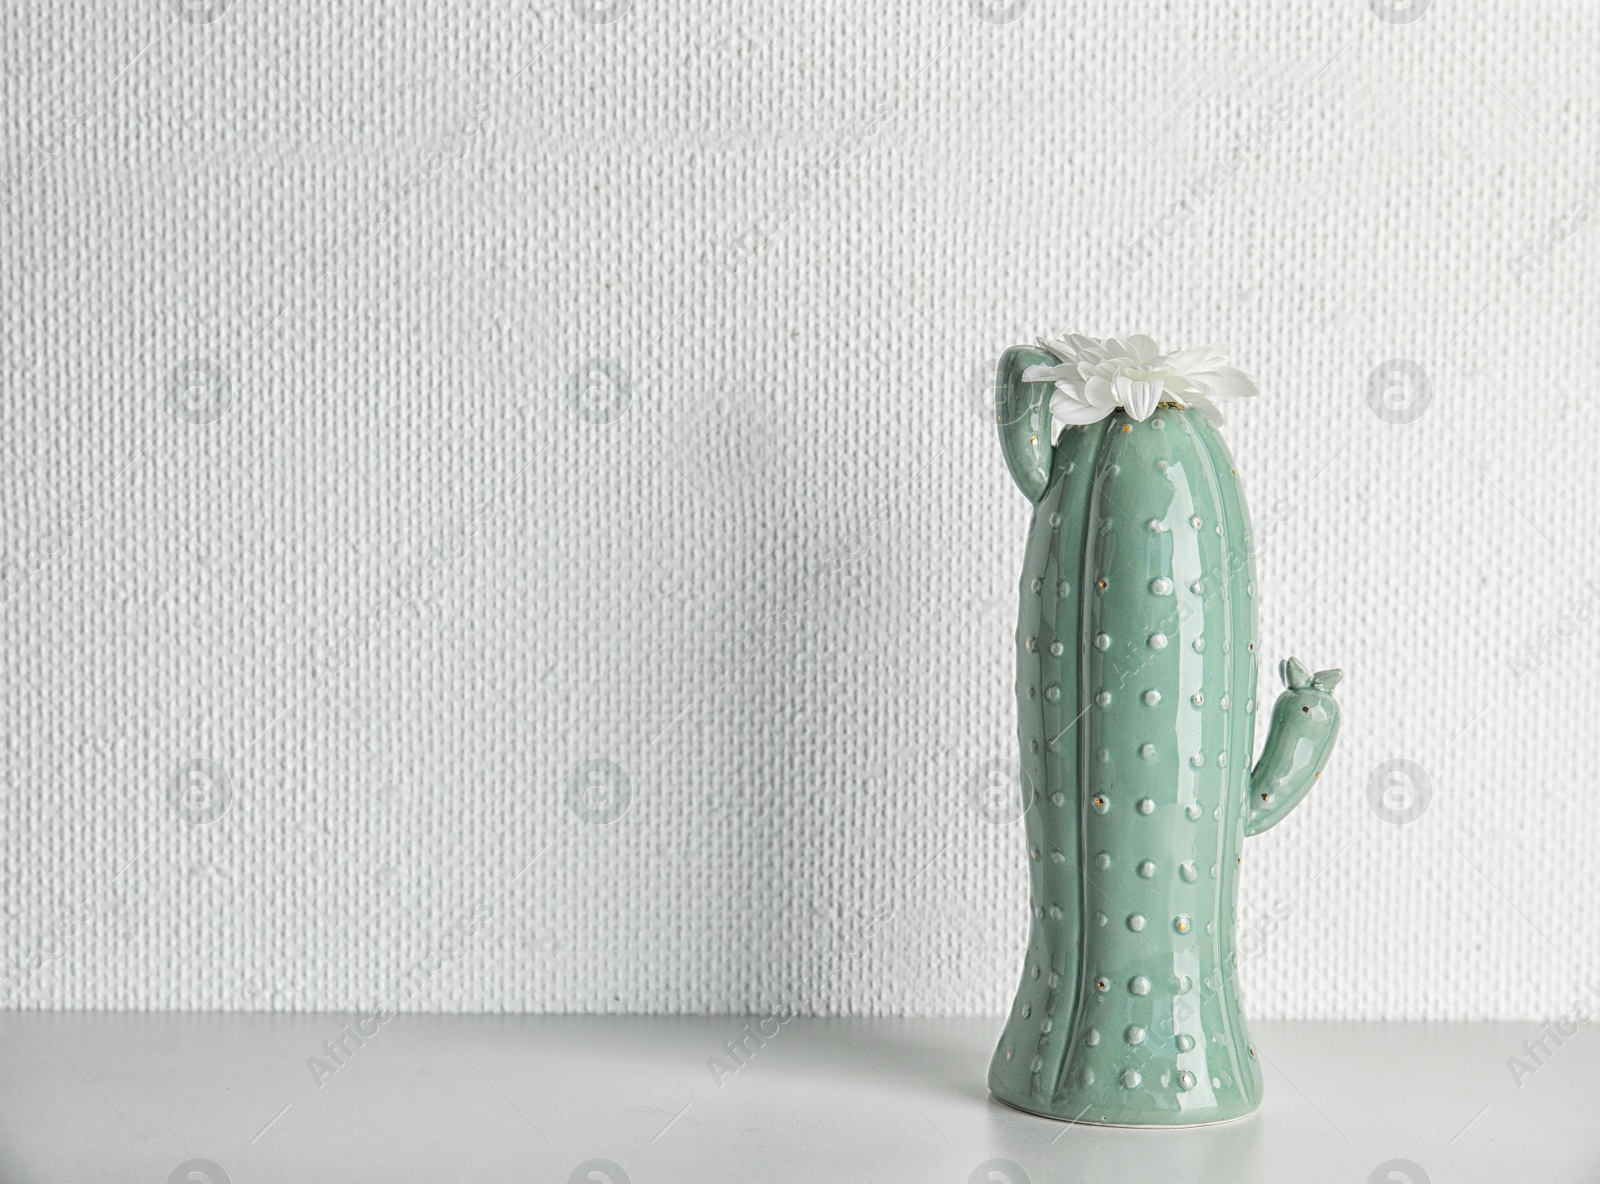 Photo of Trendy cactus shaped vase with flower on table against light wall. Creative decor